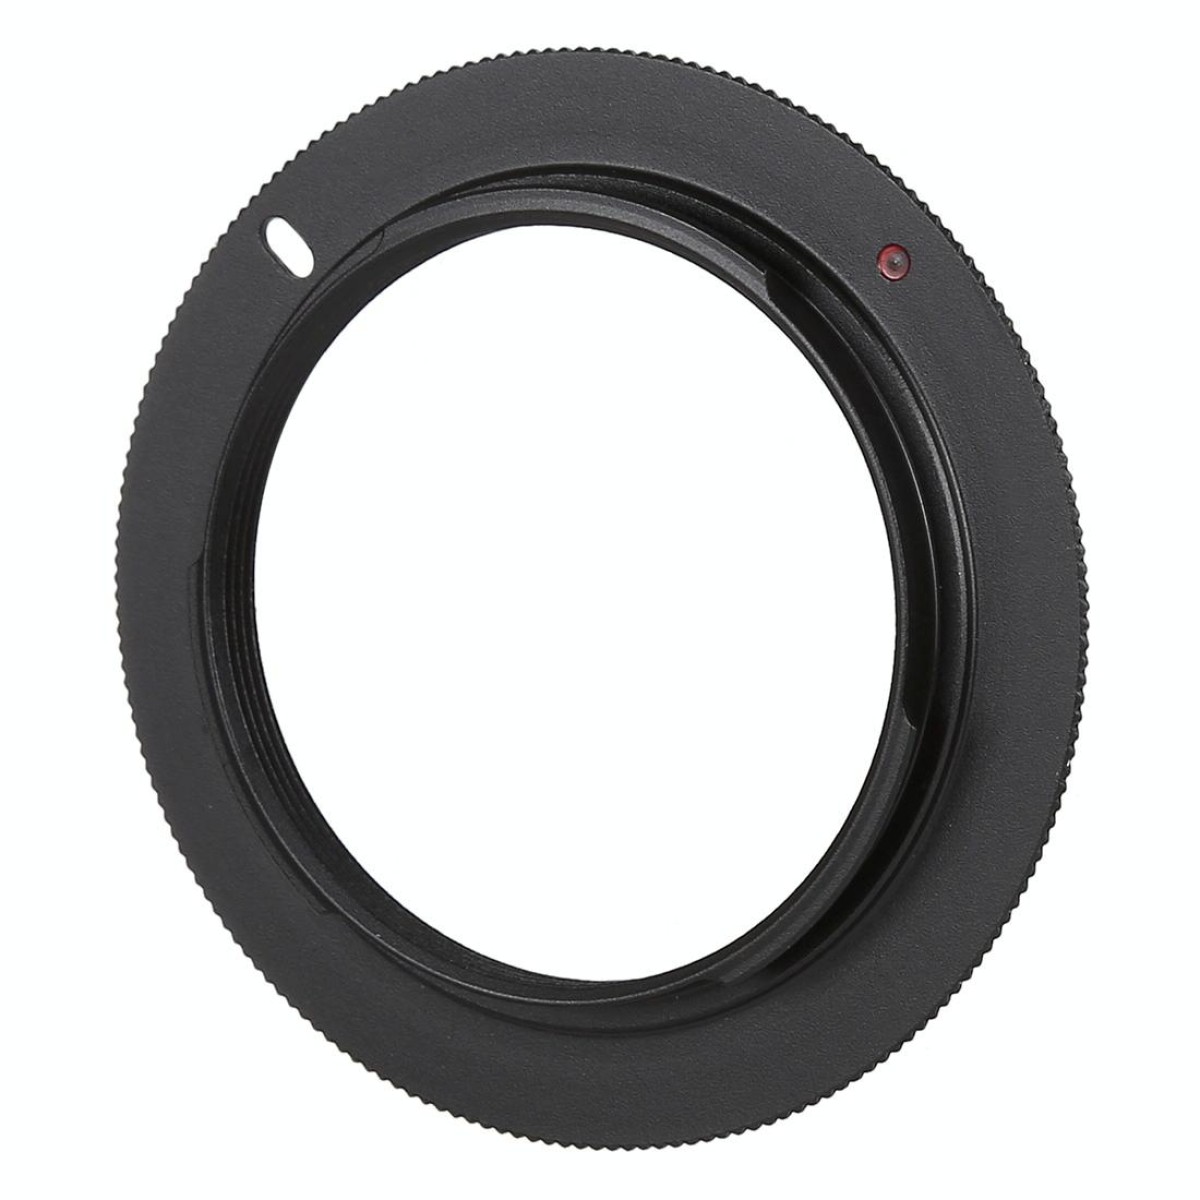 M42-AI  M42 Thread Lens to AI Mount Metal Adapter Stepping Ring